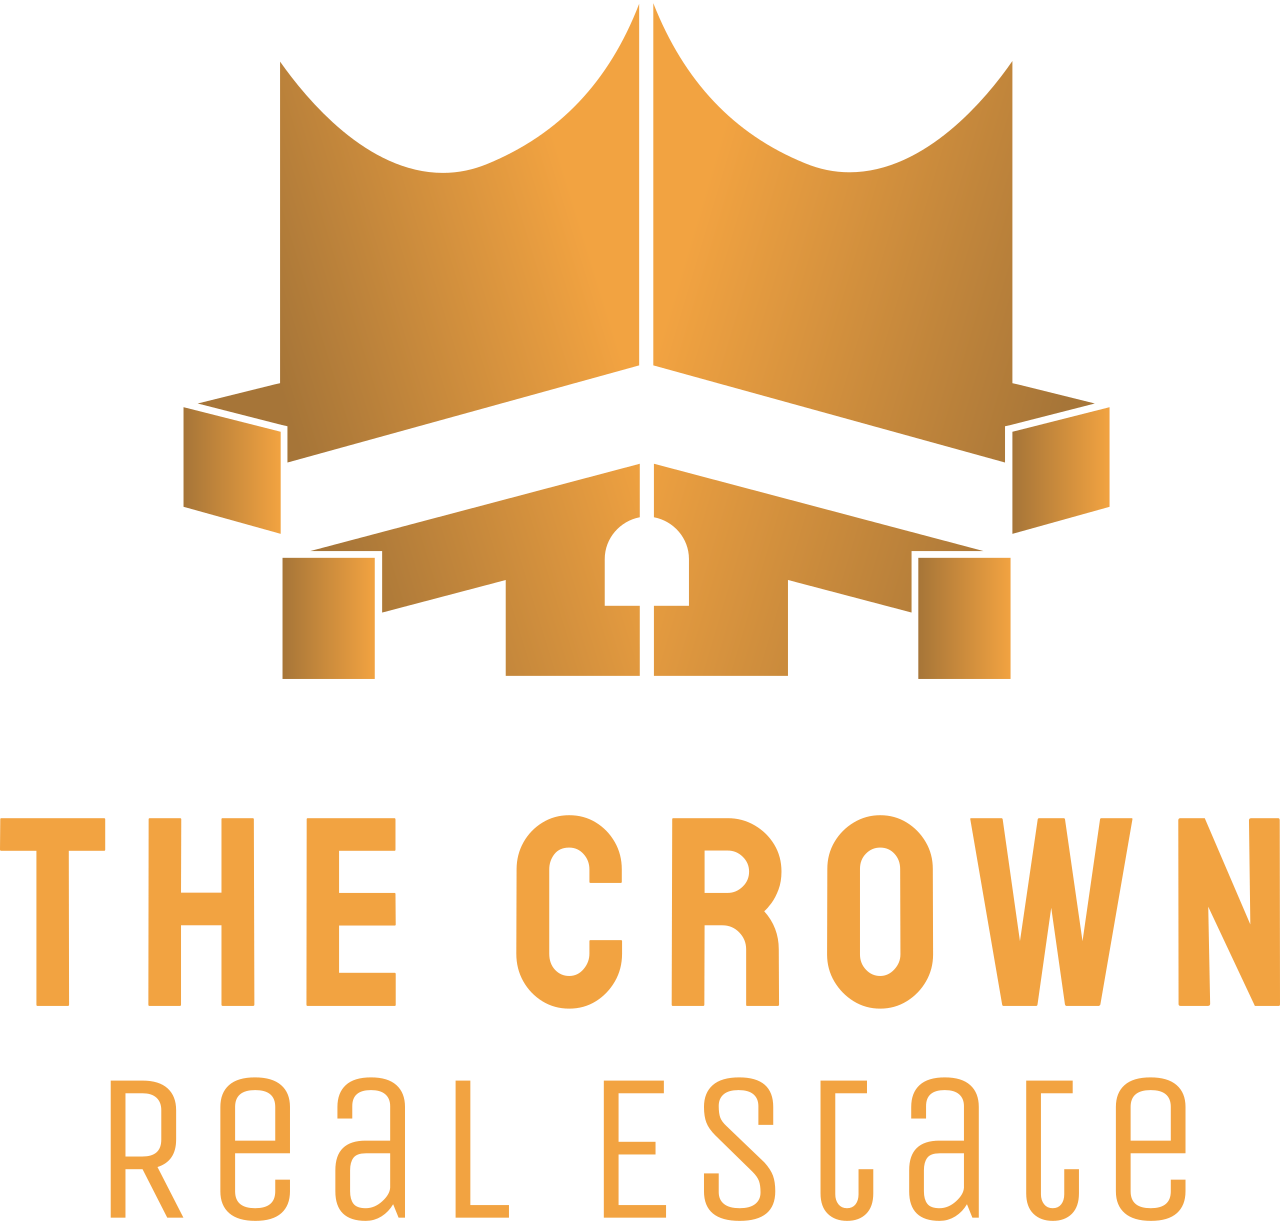 The Crown's web page